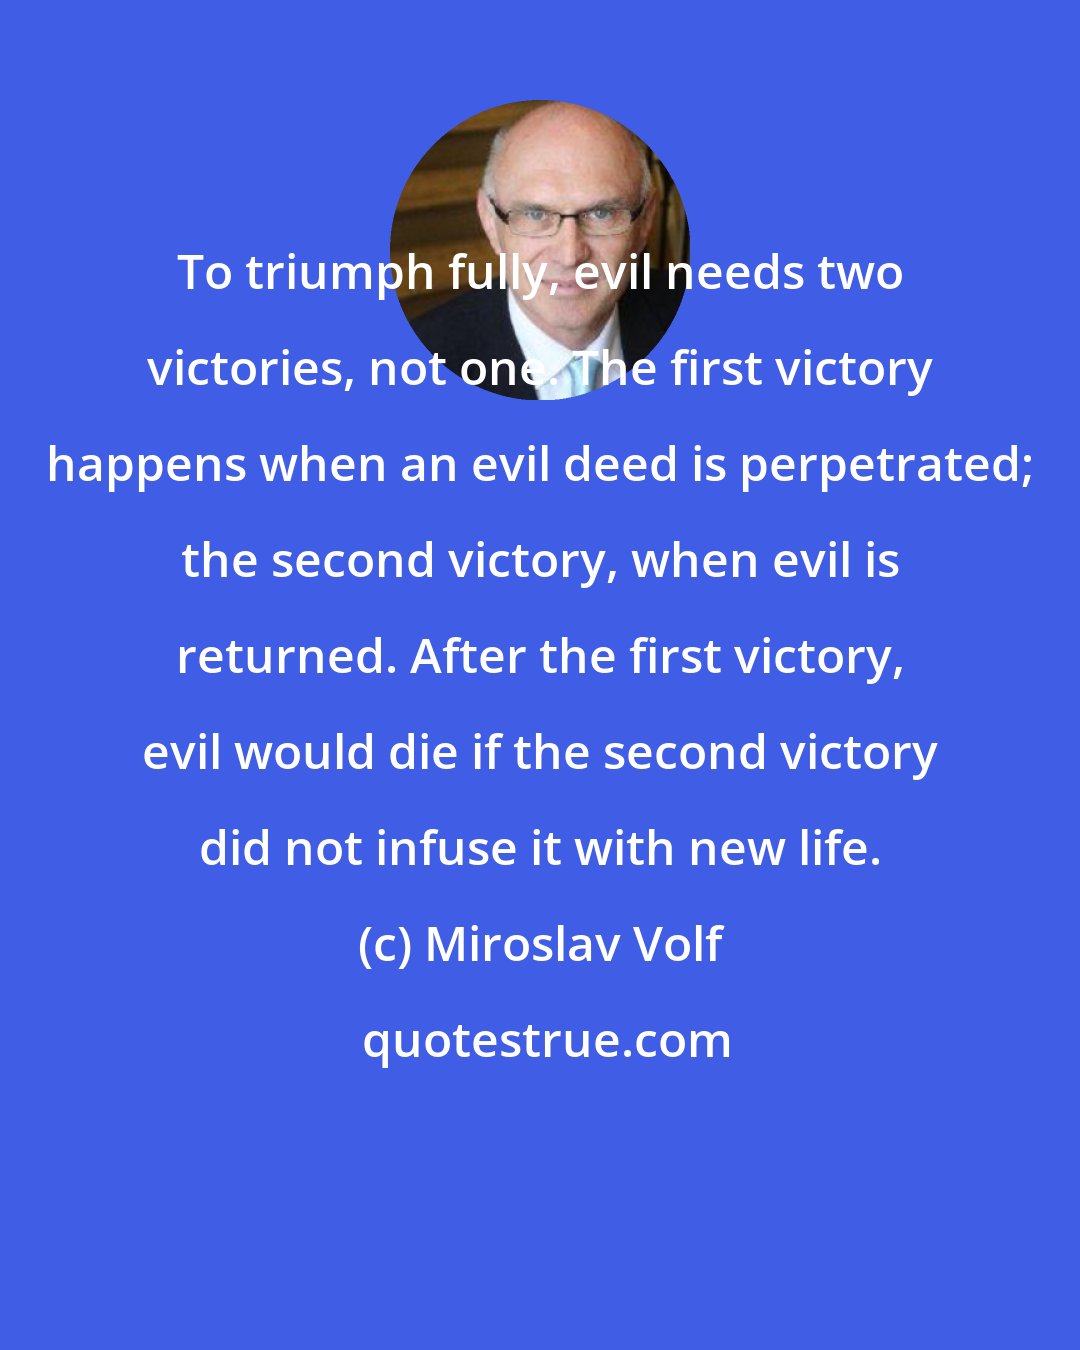 Miroslav Volf: To triumph fully, evil needs two victories, not one. The first victory happens when an evil deed is perpetrated; the second victory, when evil is returned. After the first victory, evil would die if the second victory did not infuse it with new life.